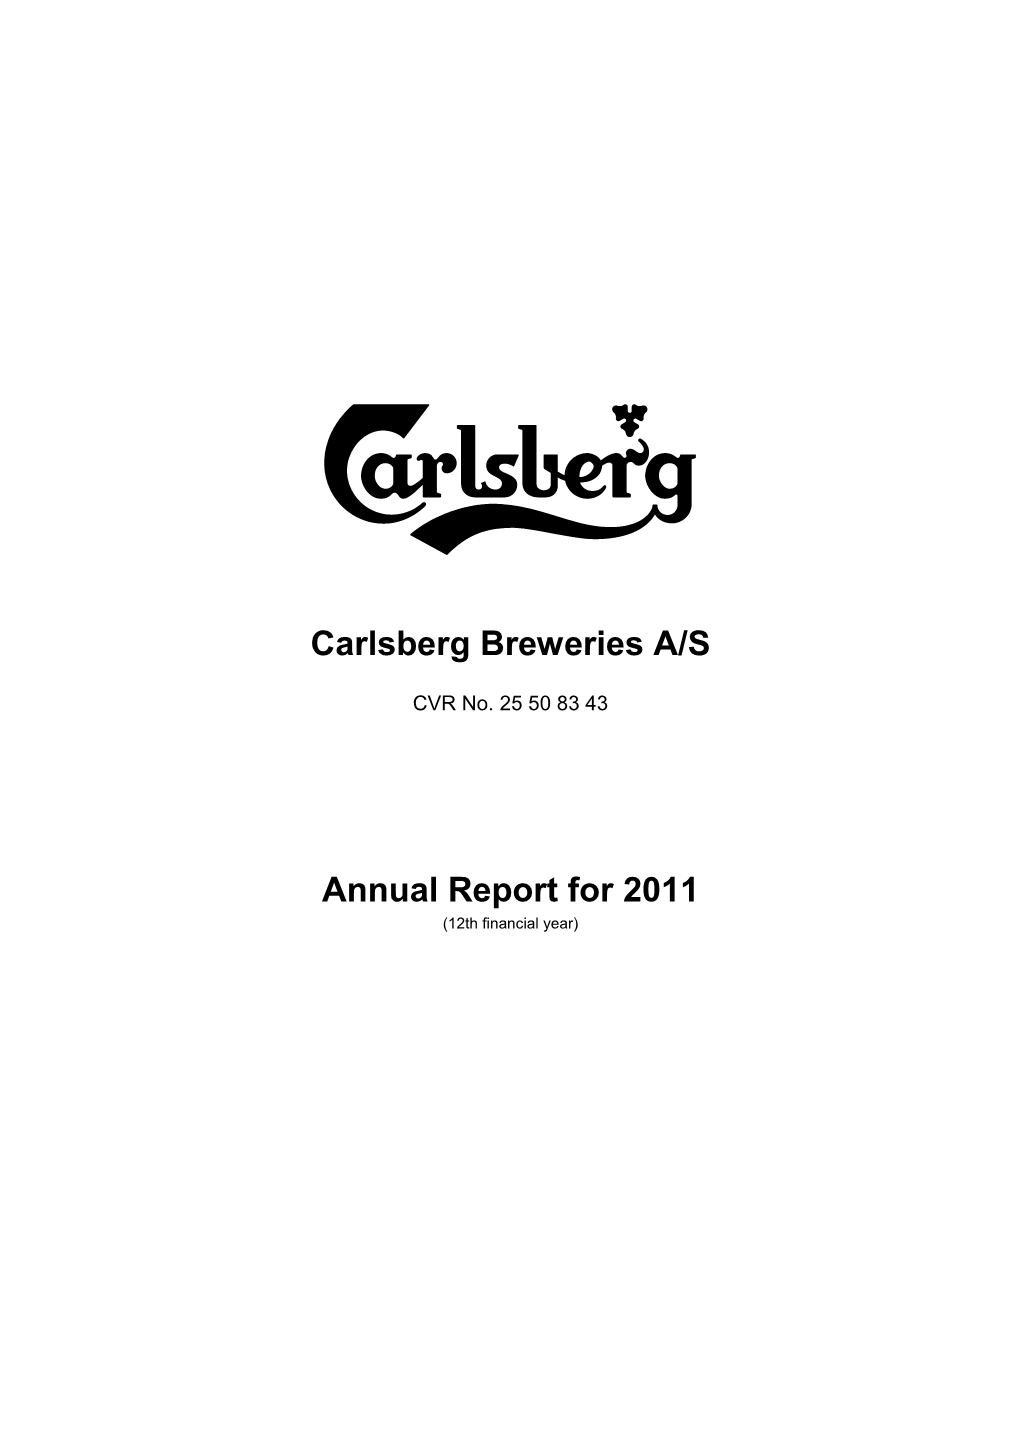 Annual Report for 2011 (12Th Financial Year)